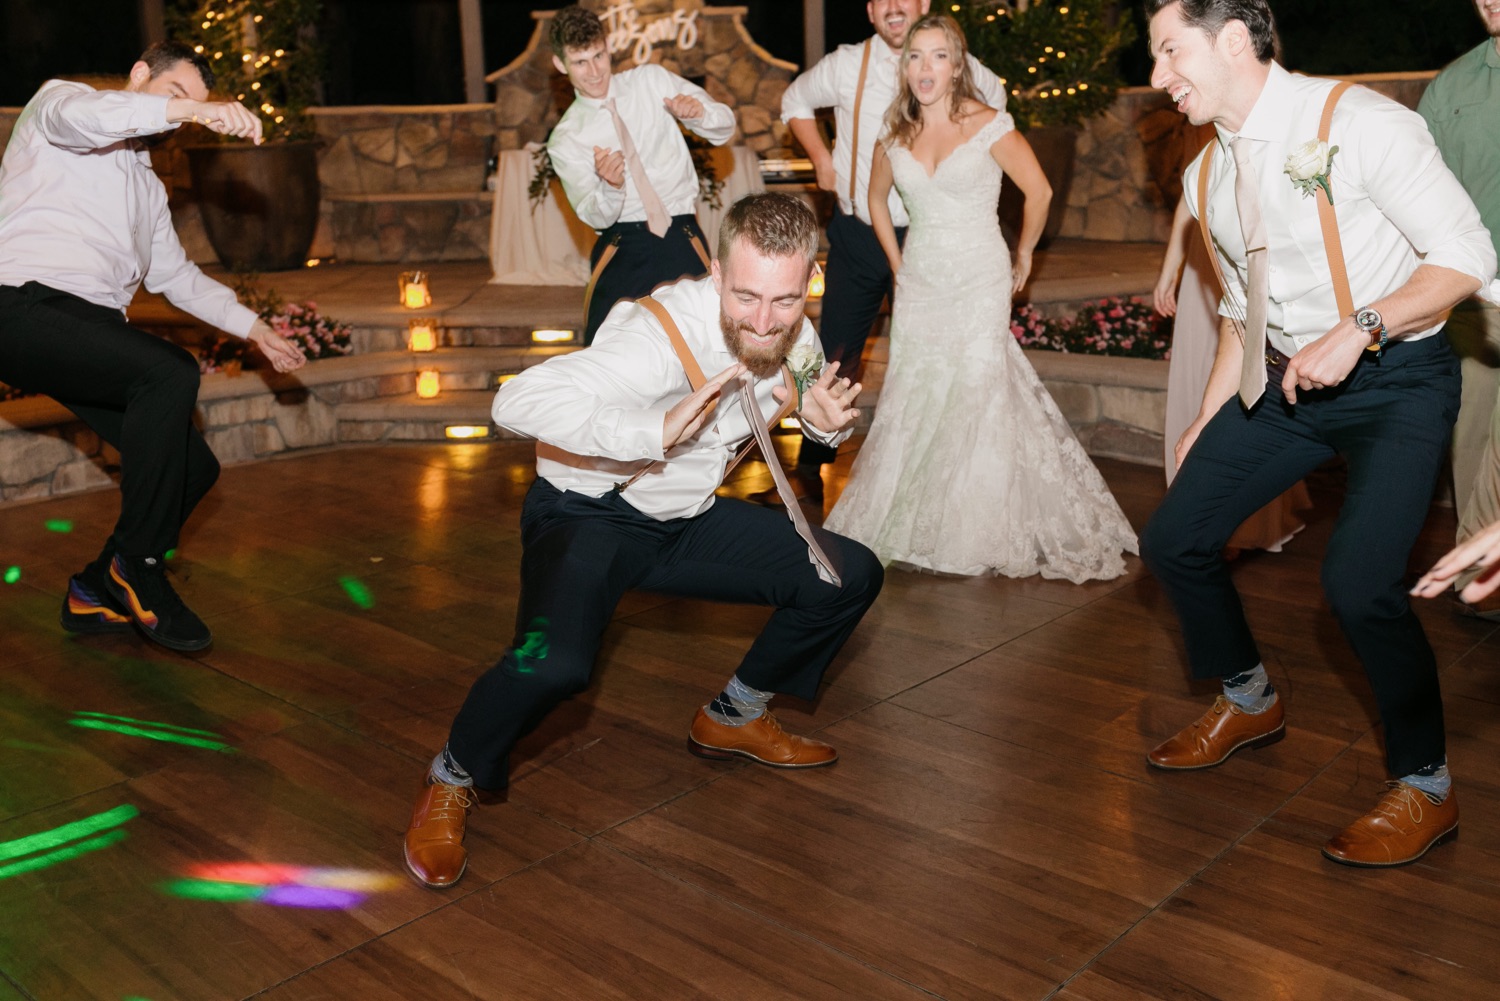 Groom's brother dancing at reception